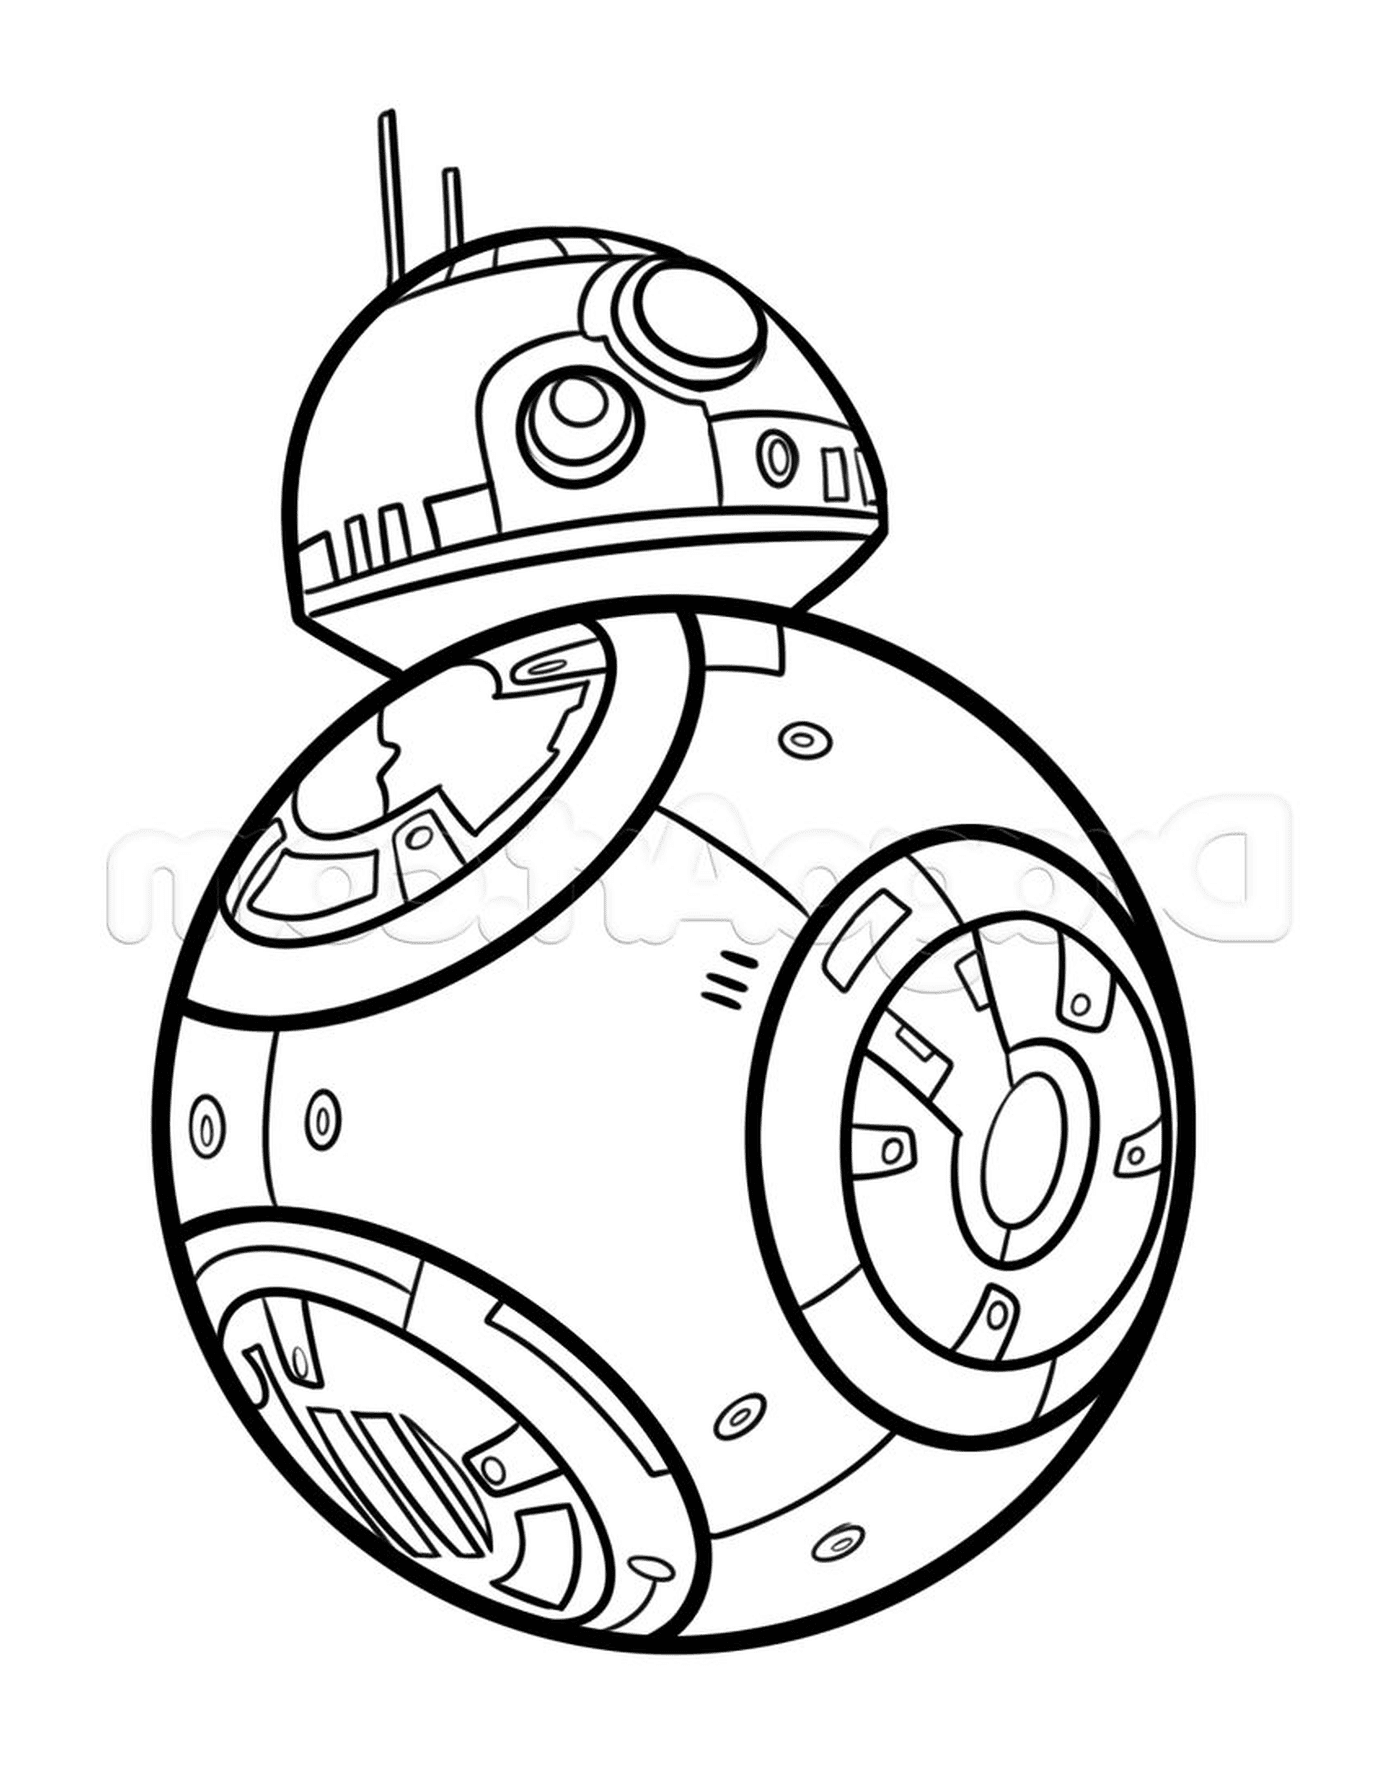  How to draw BB8 from Star Wars 